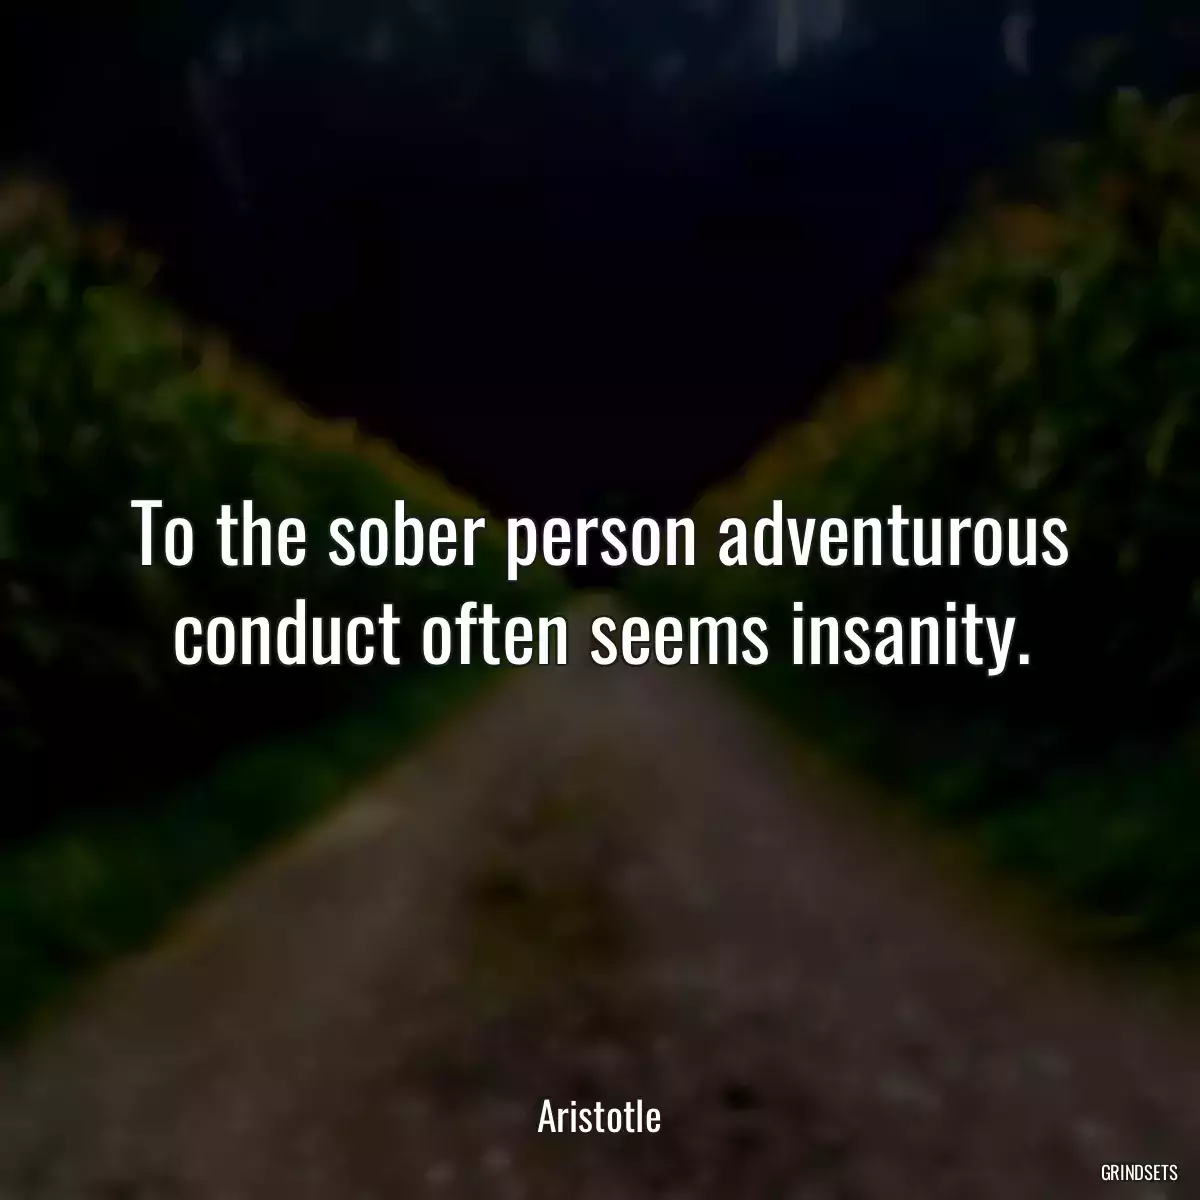 To the sober person adventurous conduct often seems insanity.